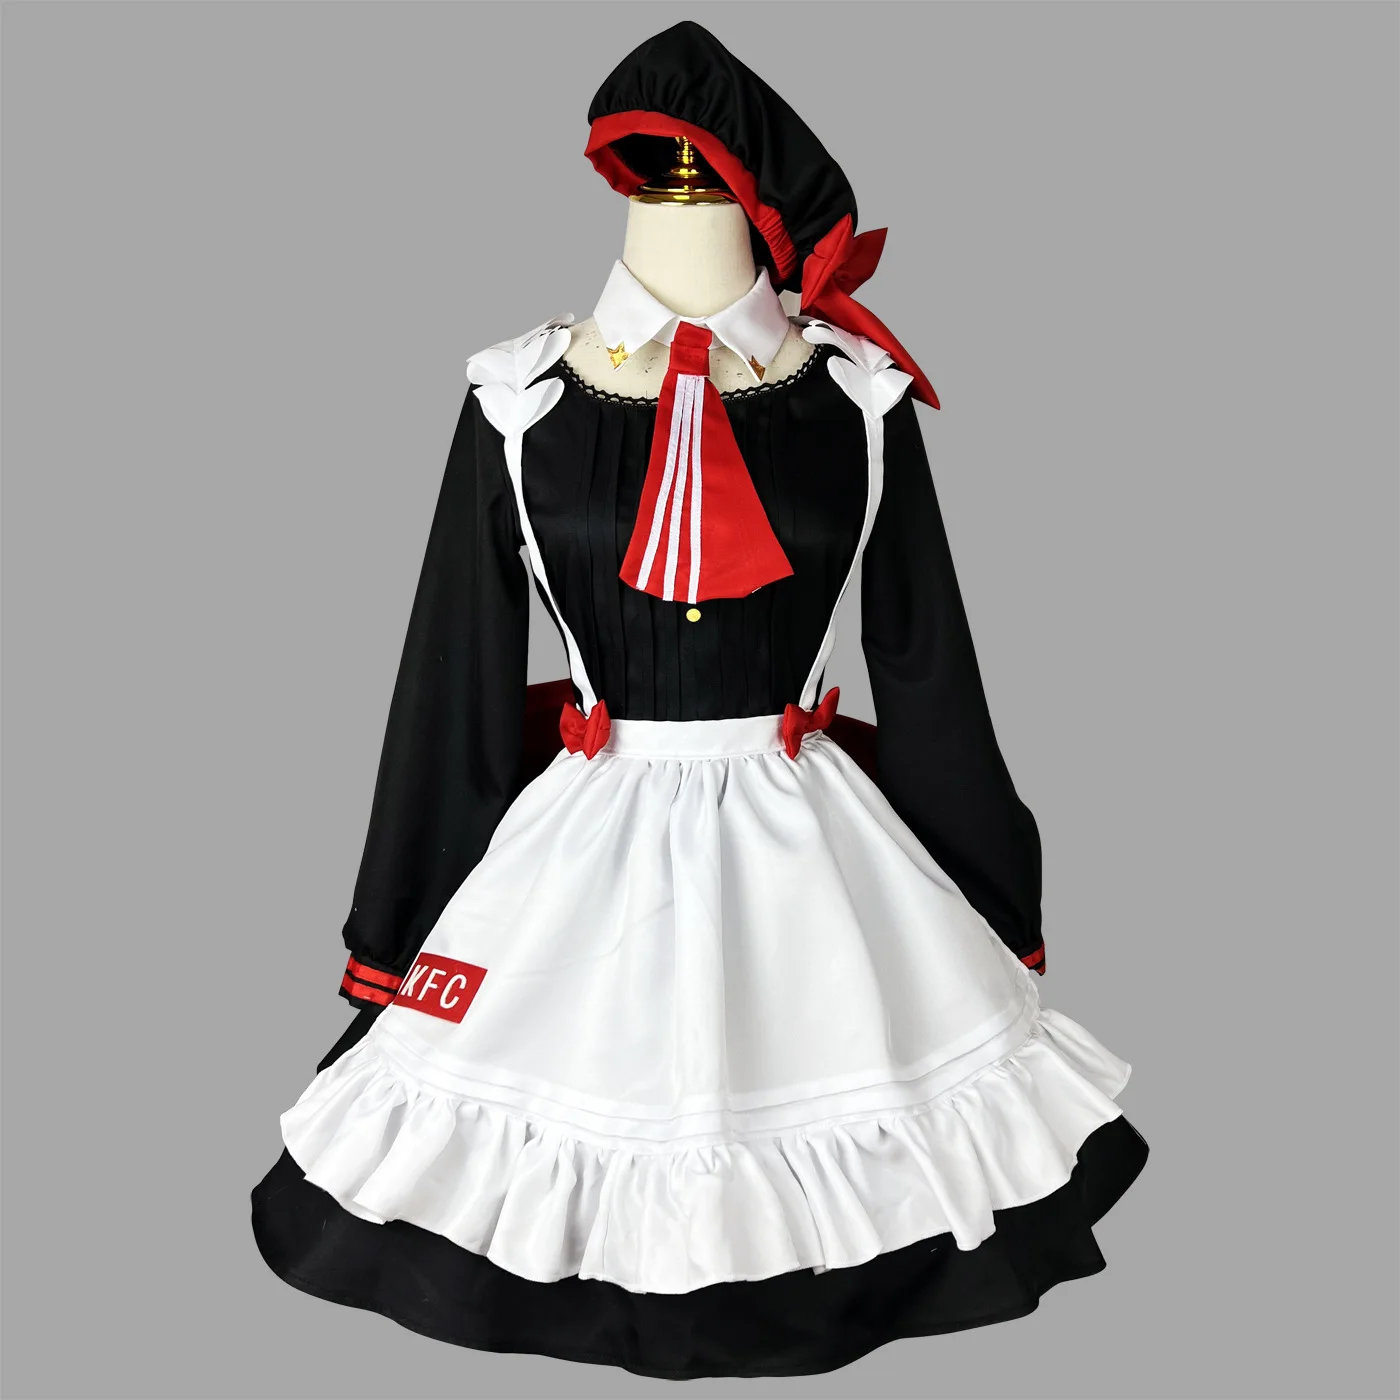 

Anime Game Genshin Impact Noelle Cosplay Costume KFC Linkage Clerk Uniform Lovely Maid Dress Outfit Halloween Anime Role Play